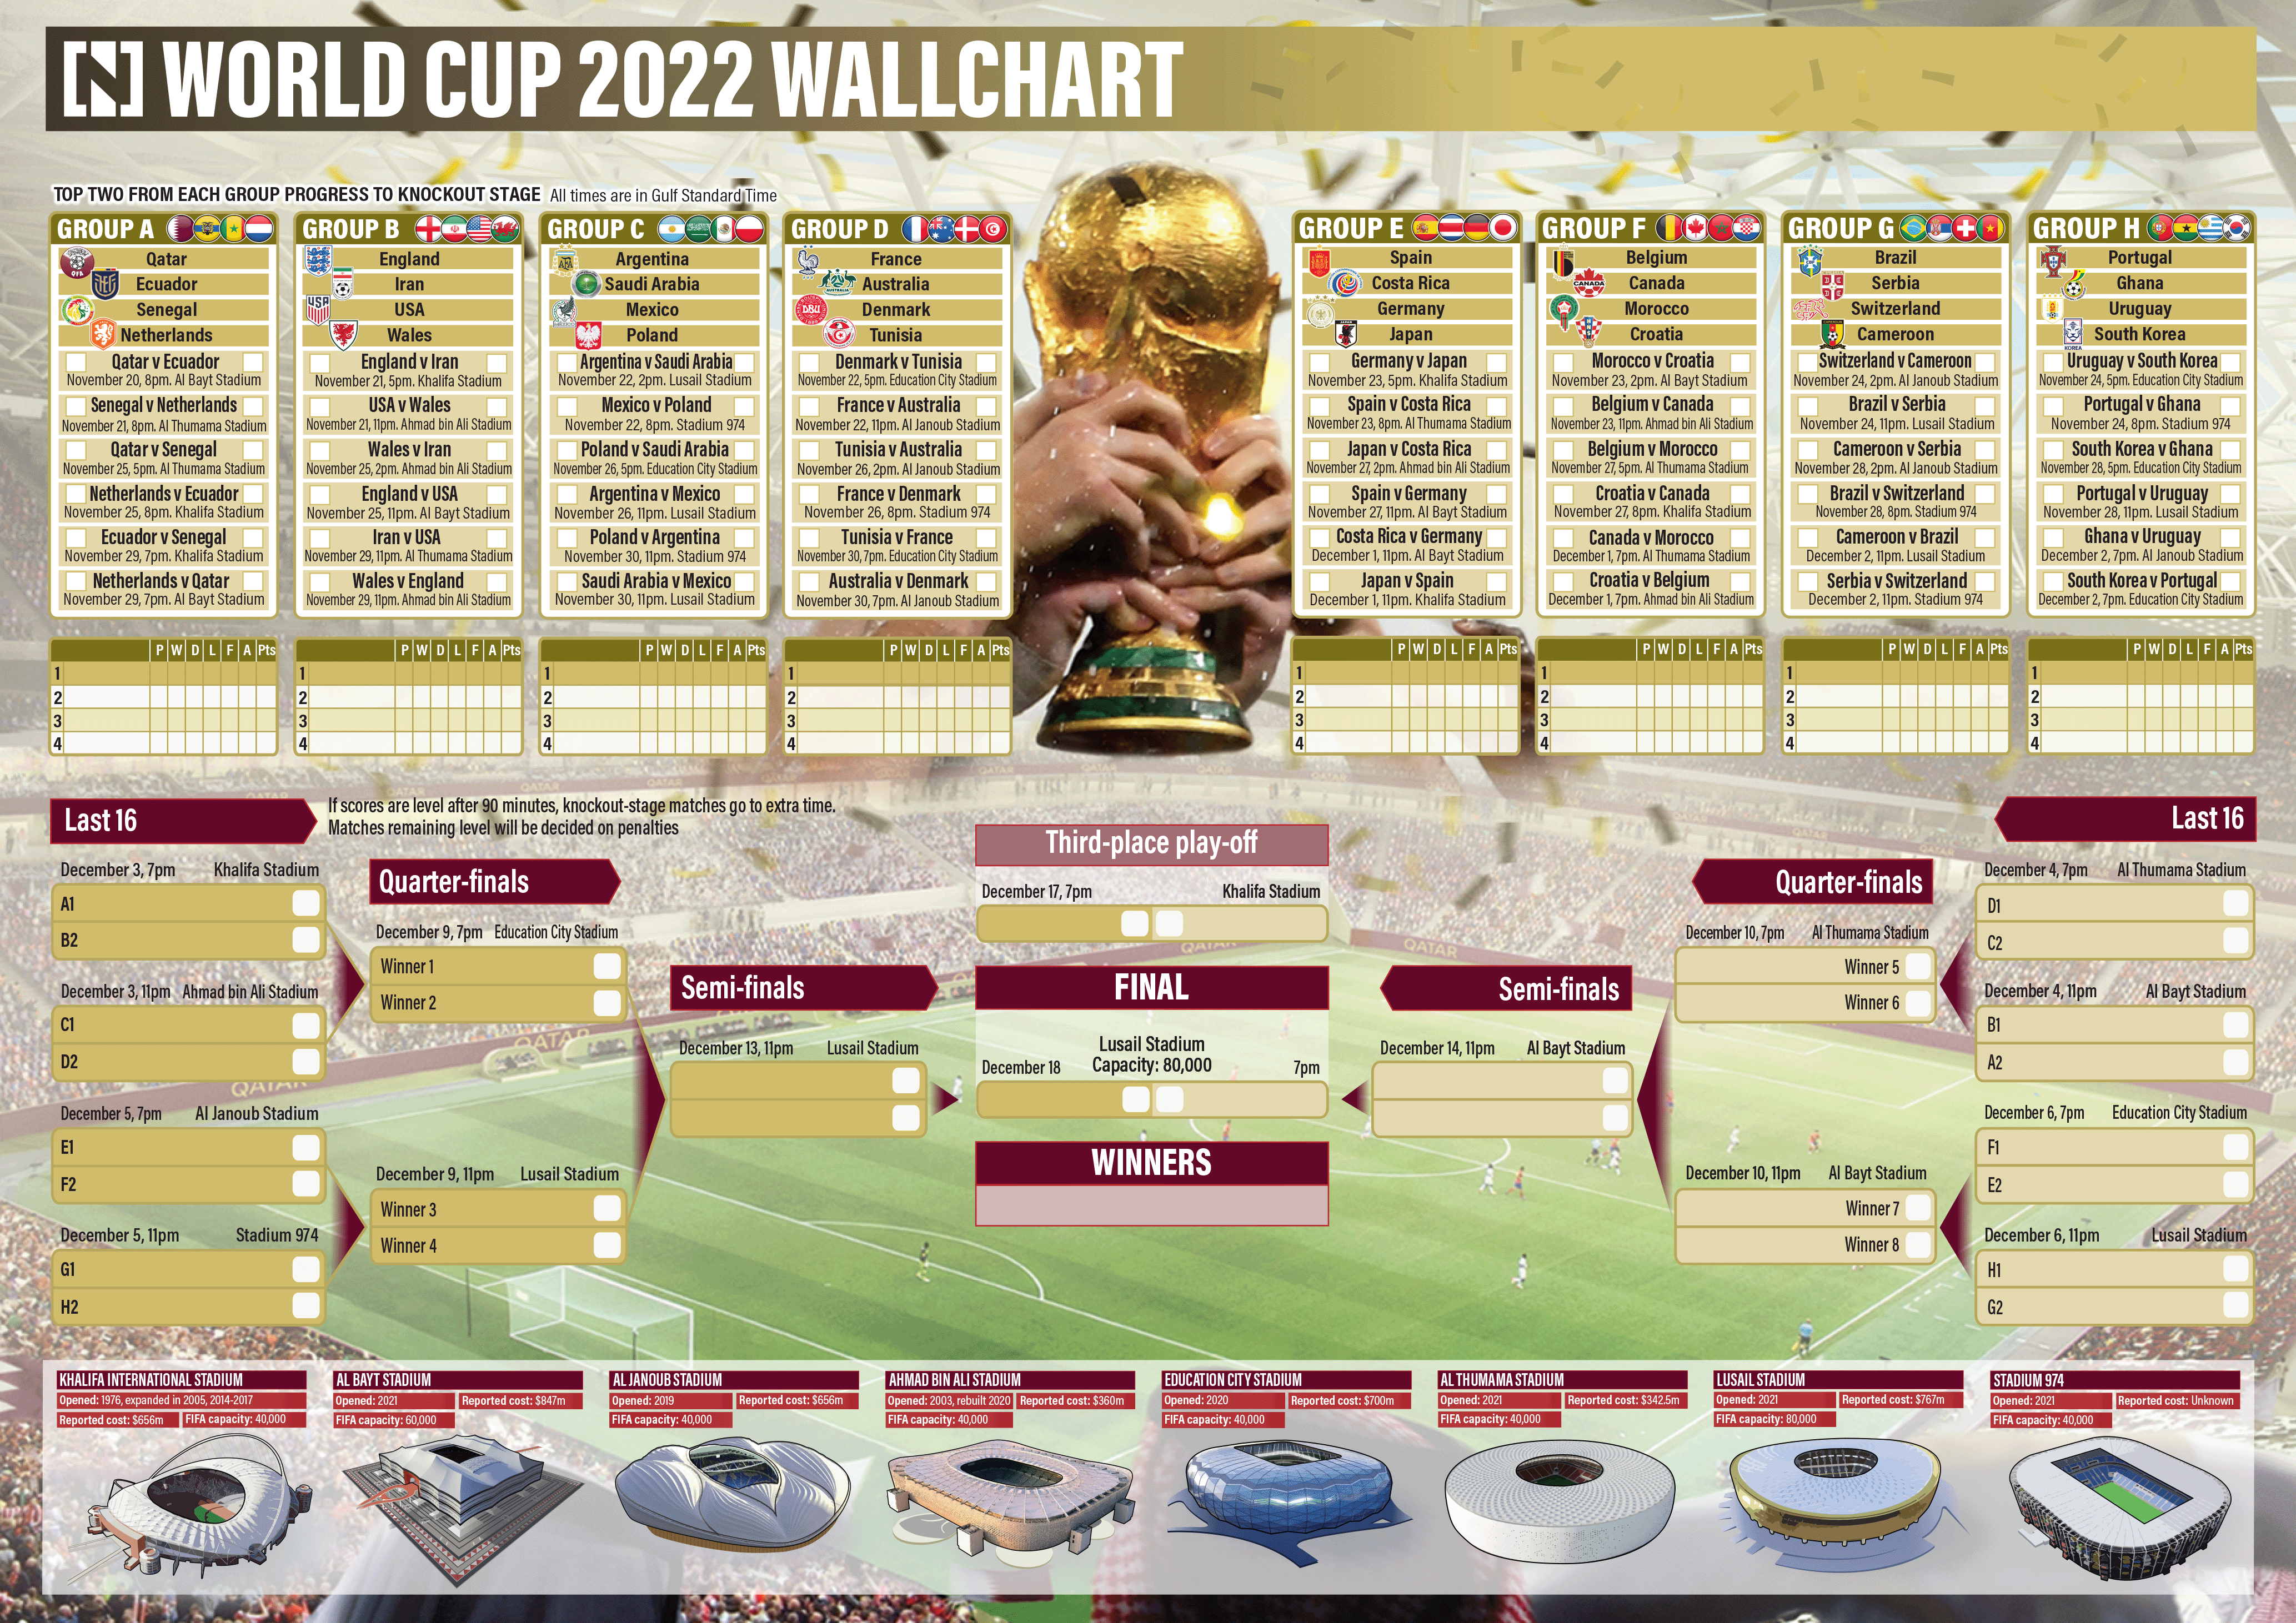 World Cup 2022 fixtures The National